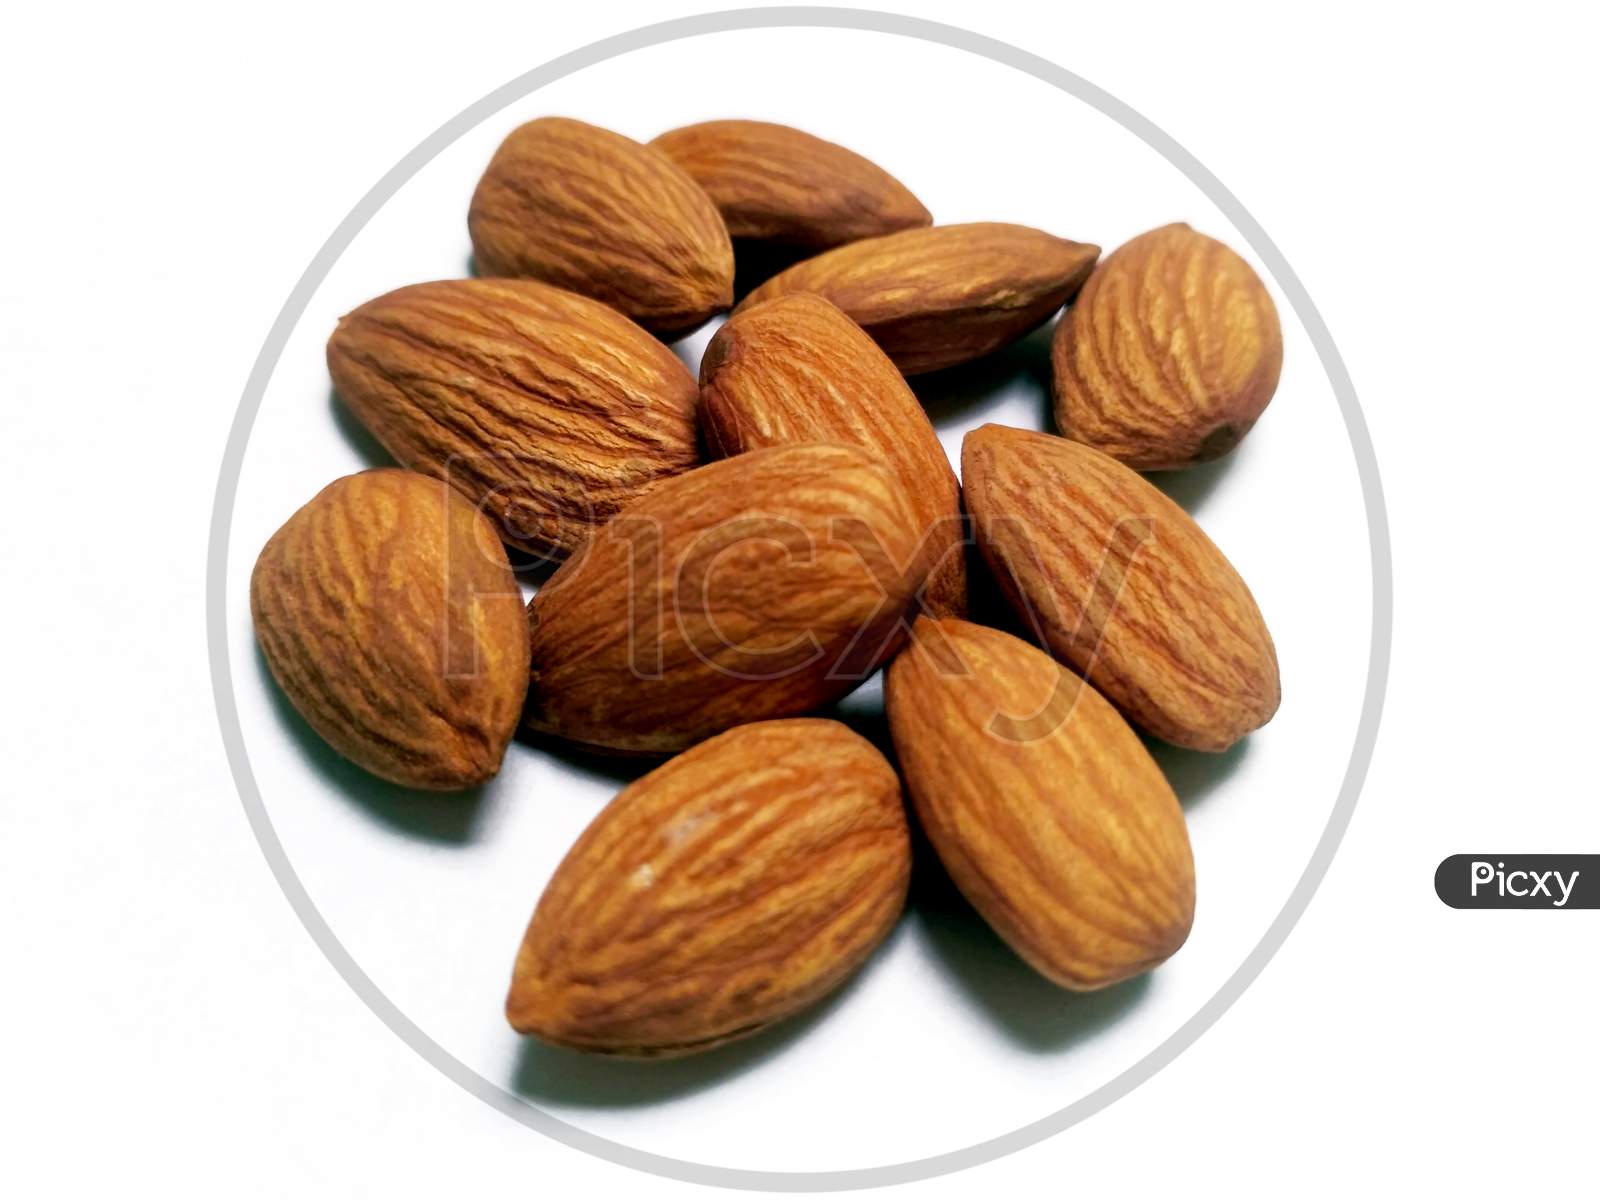 Closeup Shot Of Almonds On A White Background